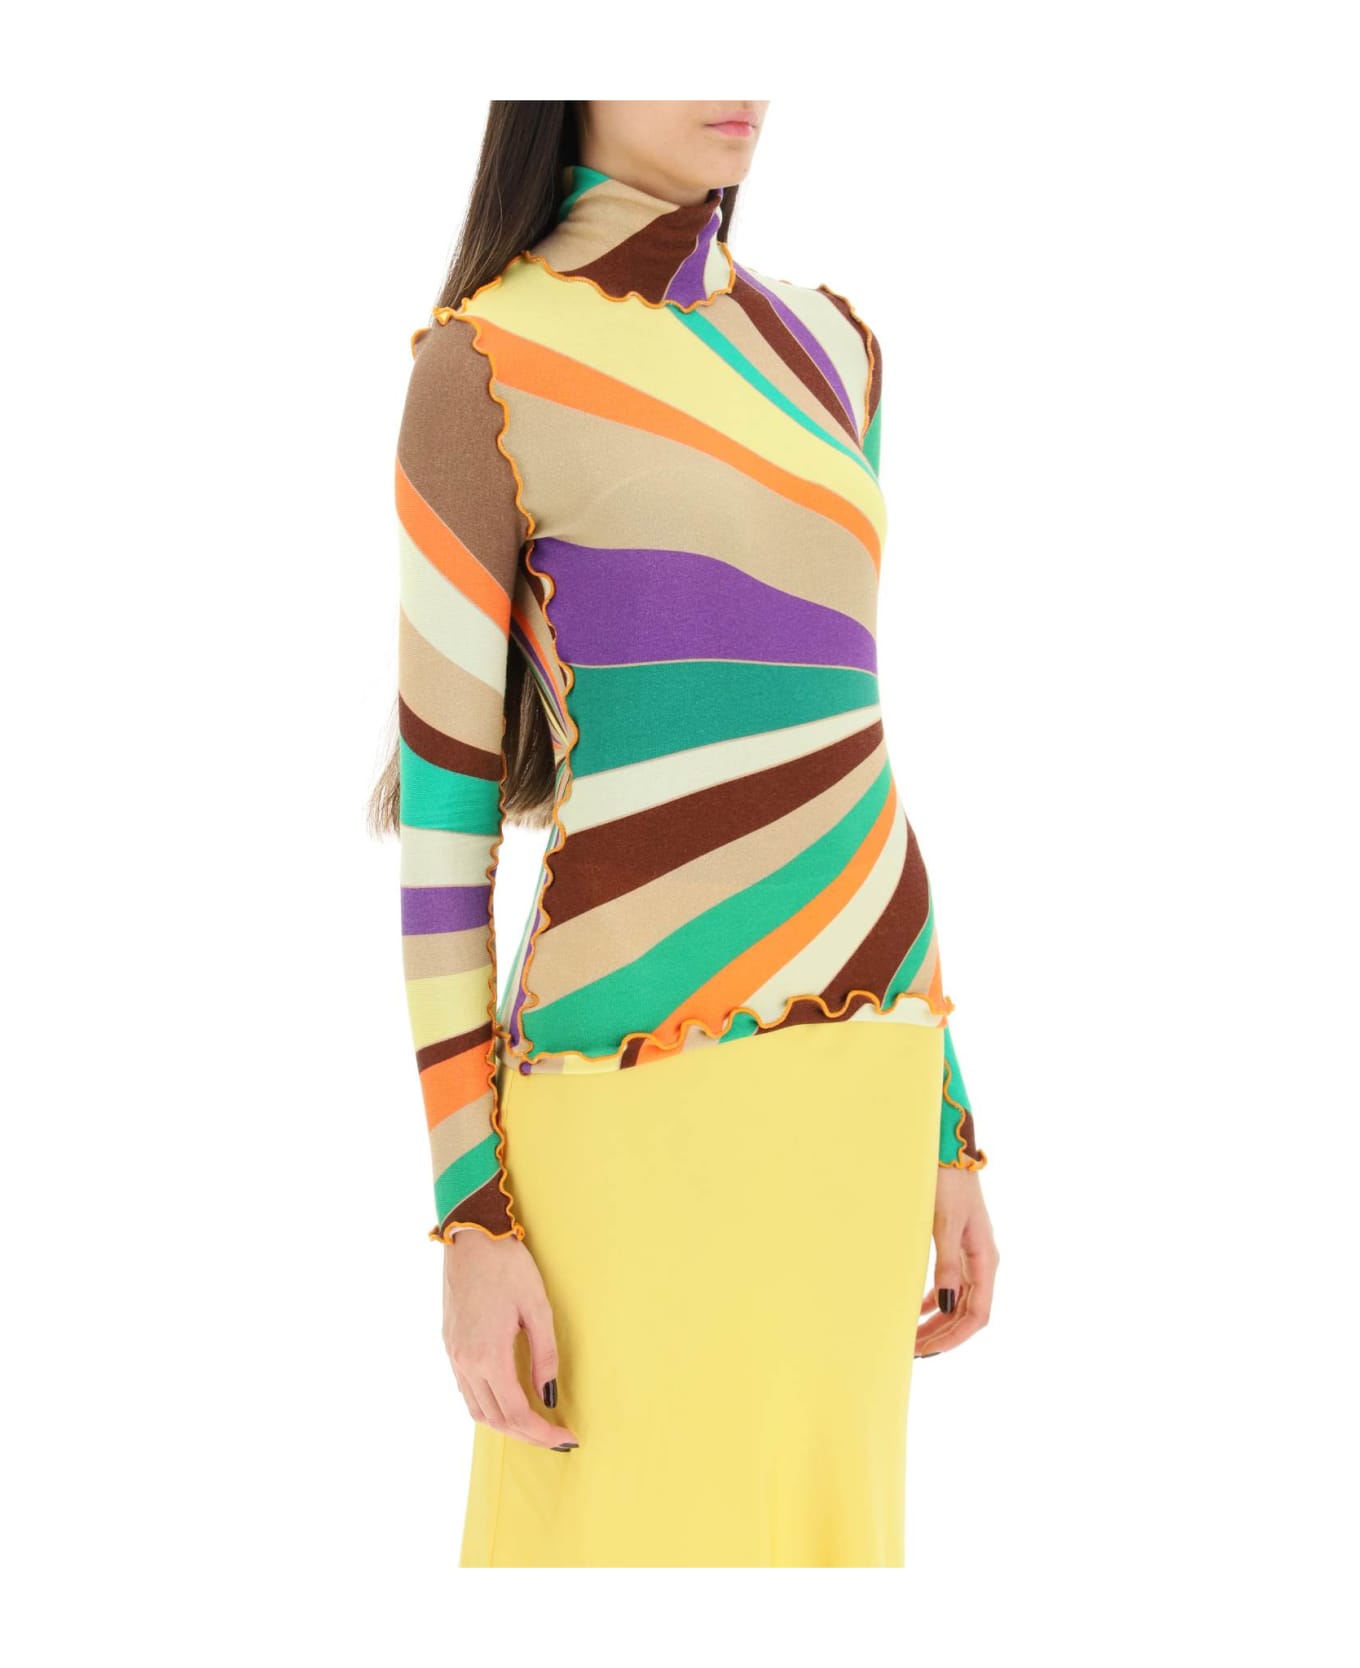 SIEDRES Multicolored Turtleneck Sweater With Gathered Stitching - MULTI